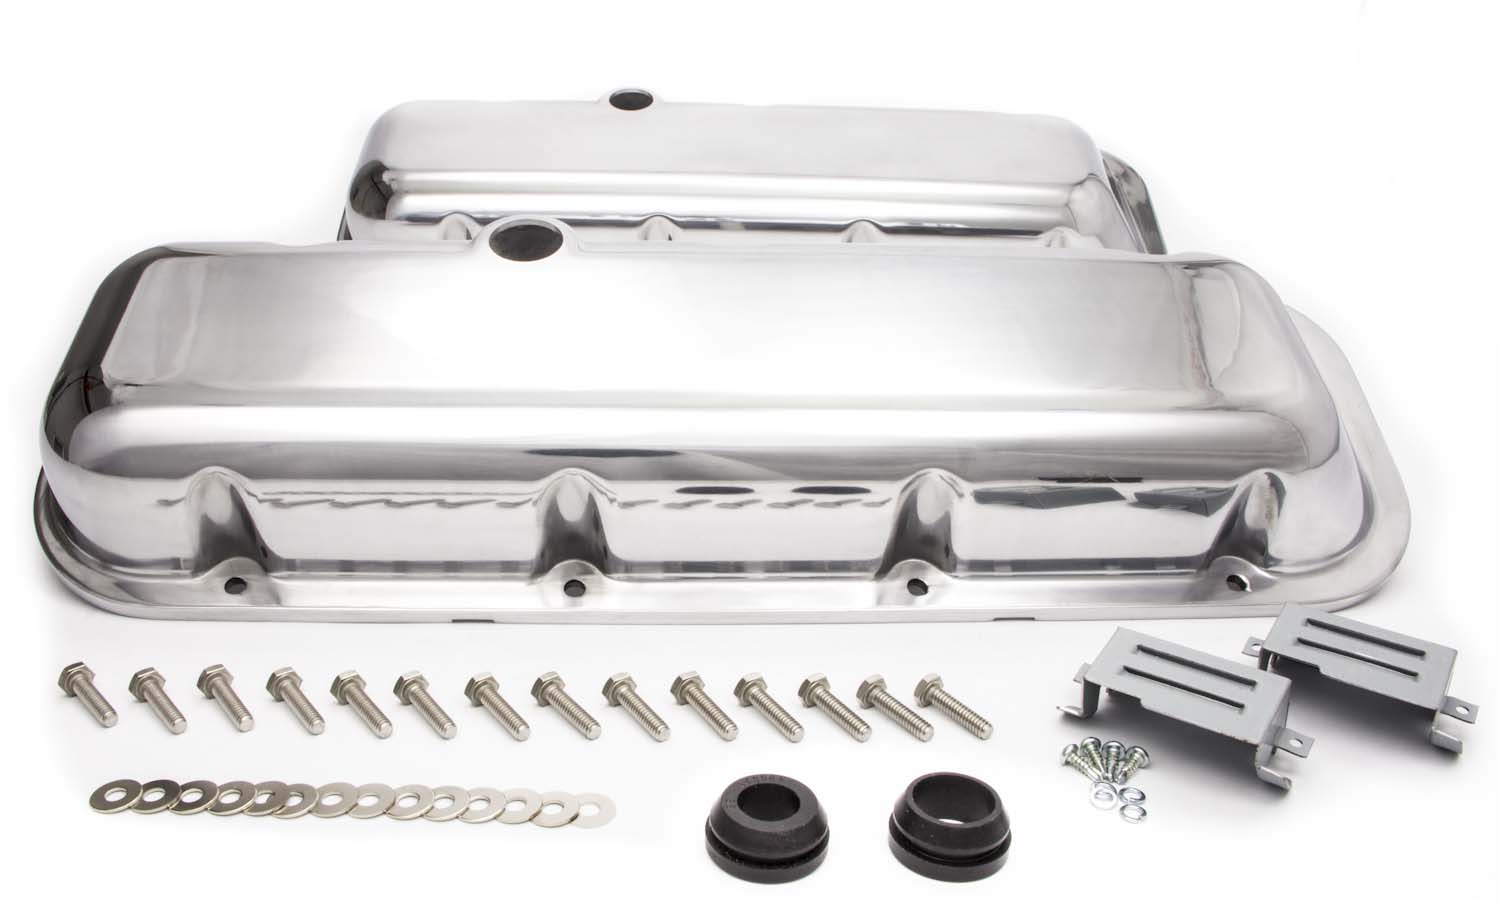 Racing Power Company R6330 Tall Ball Milled Polished Aluminum Valve Cover for Big Block Chevy 